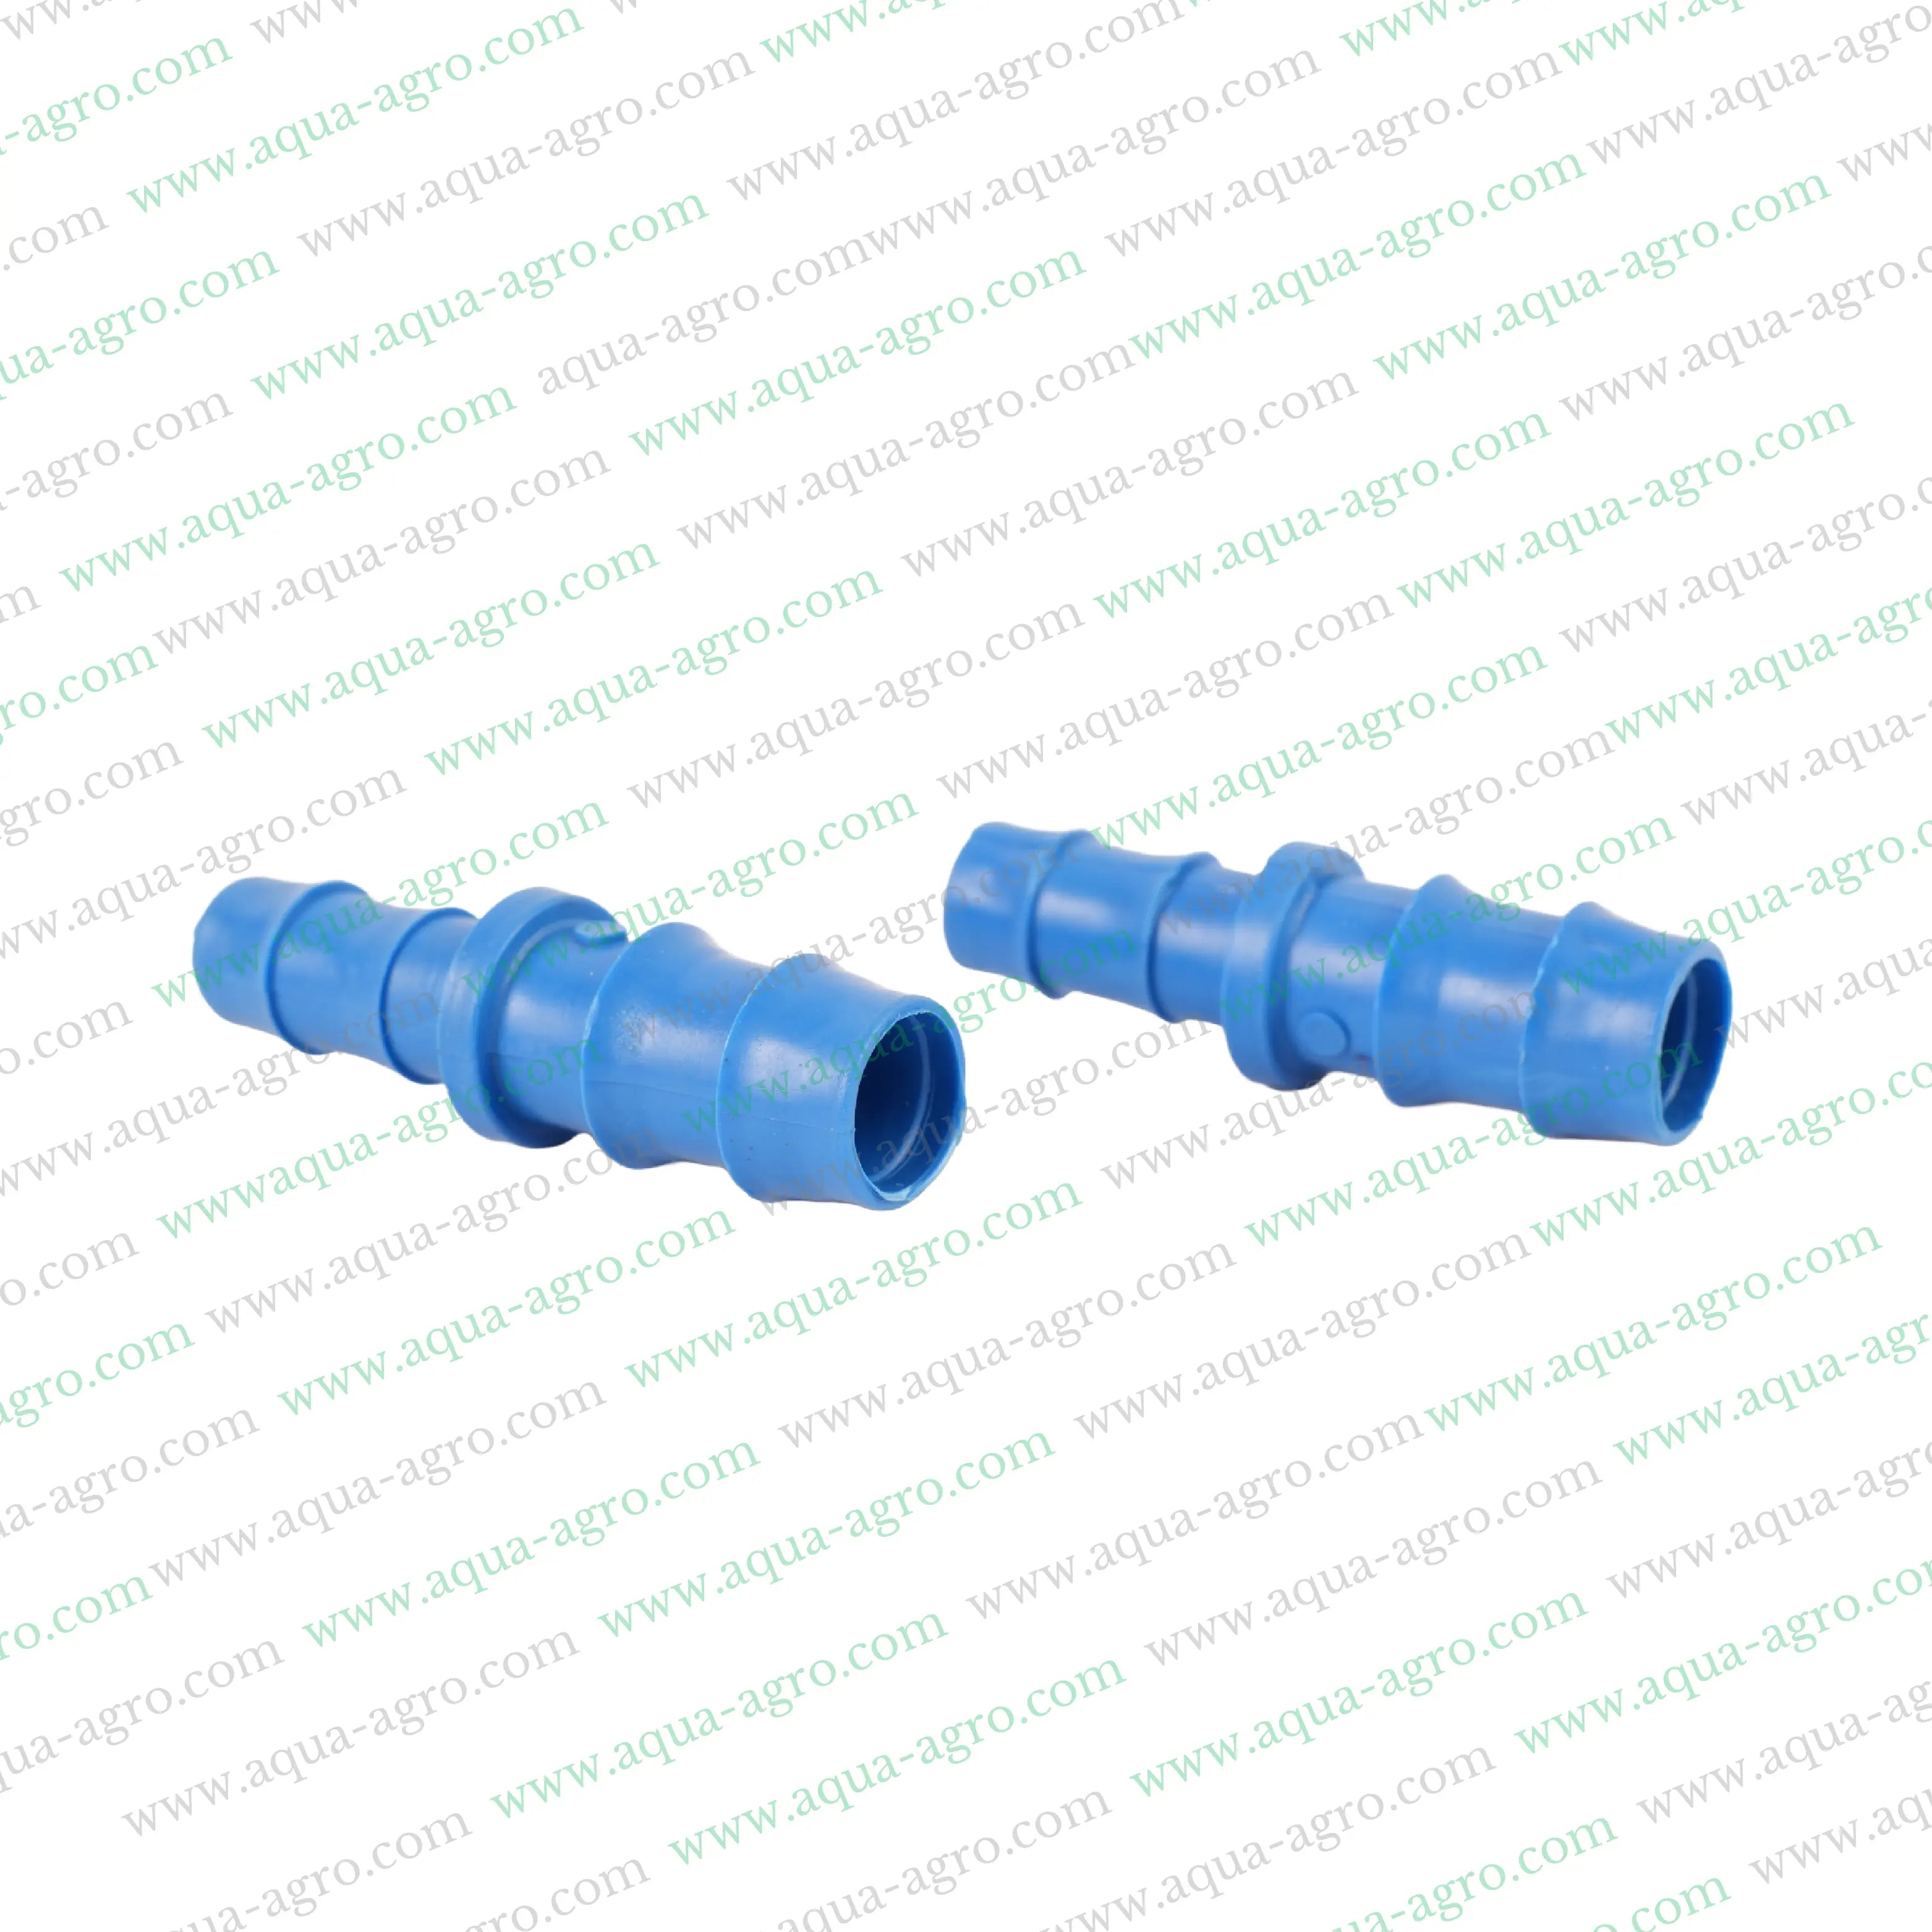 AQUA - AGRO | Drip Fittings And Accessories - Barbed Fittings - Lite - Reducing Coupler/Joiner - 16mm x 12mm